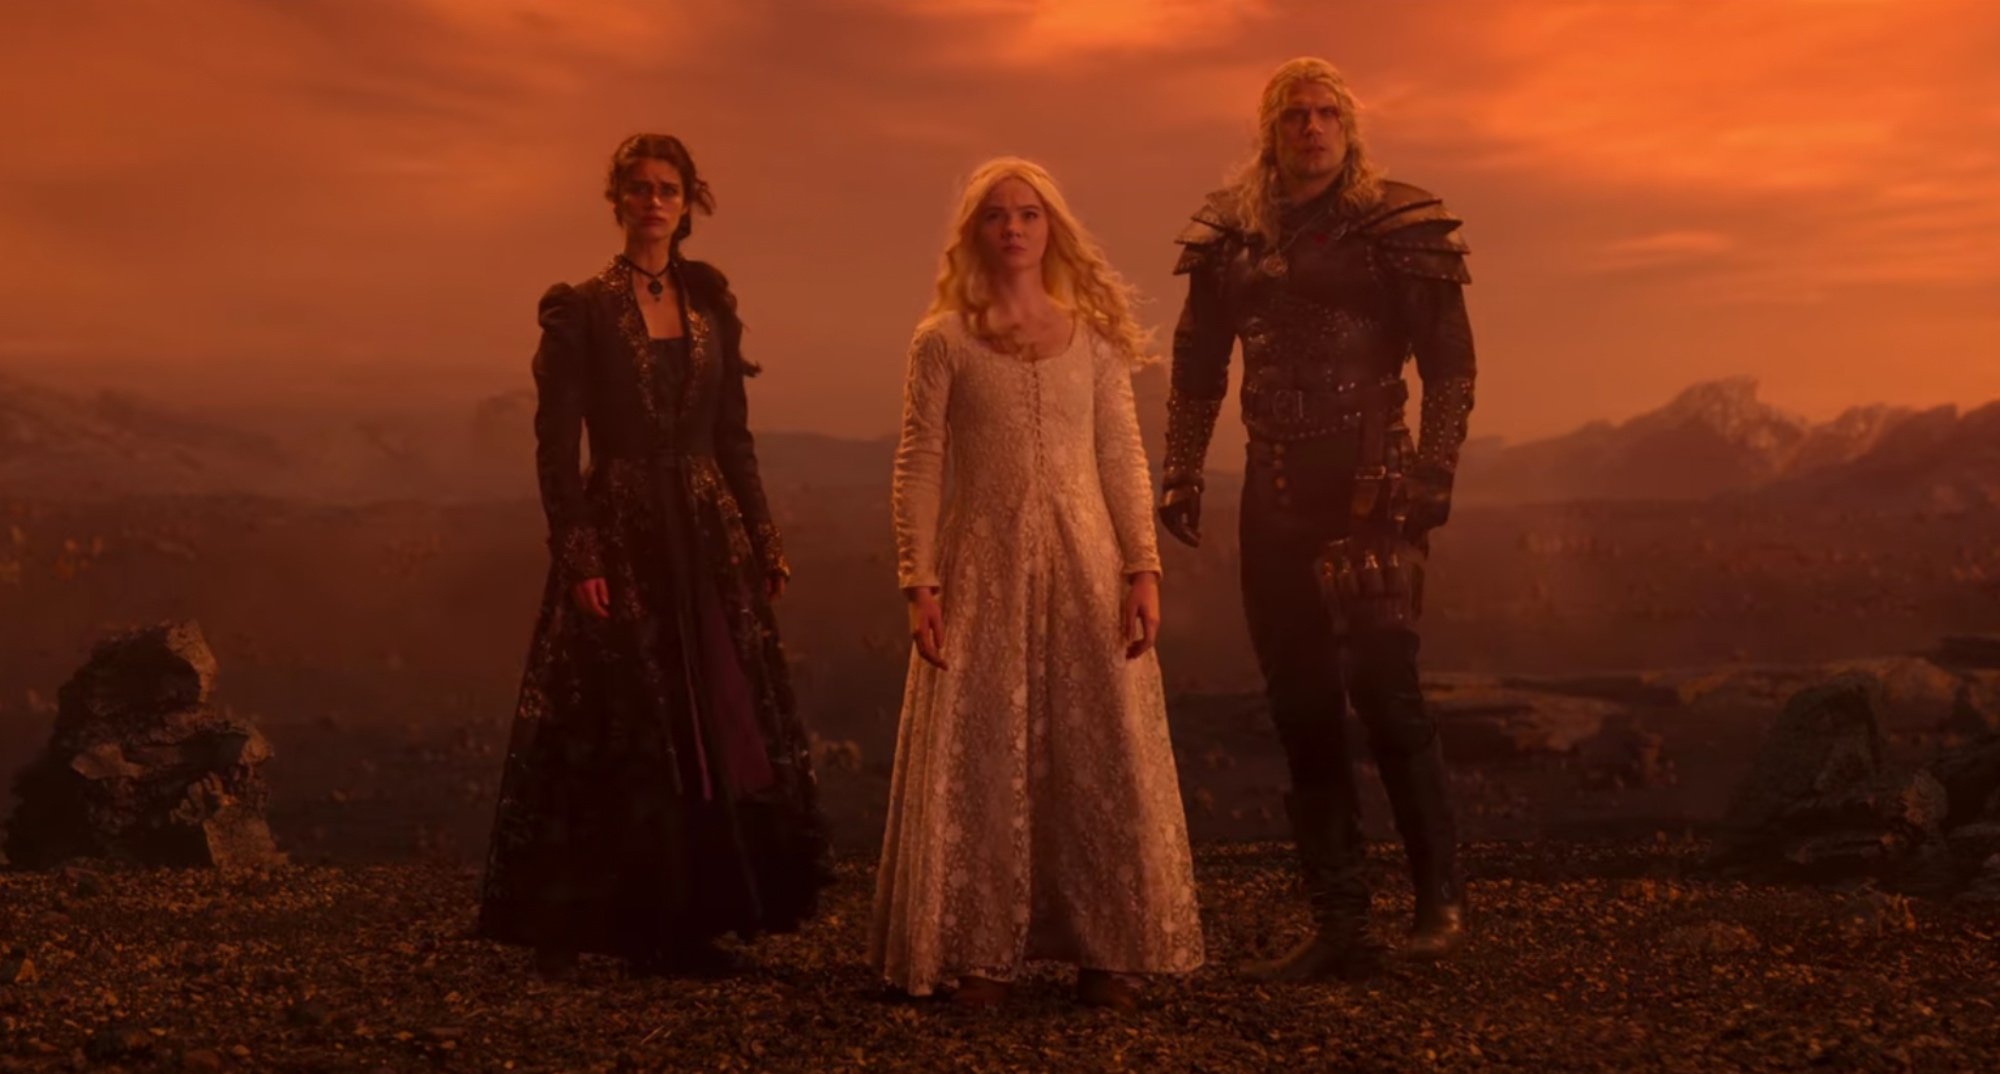 Yennefer, Ciri, and Geralt in 'The Witcher' Season 2 finale standing next to each other in relation to season 3.